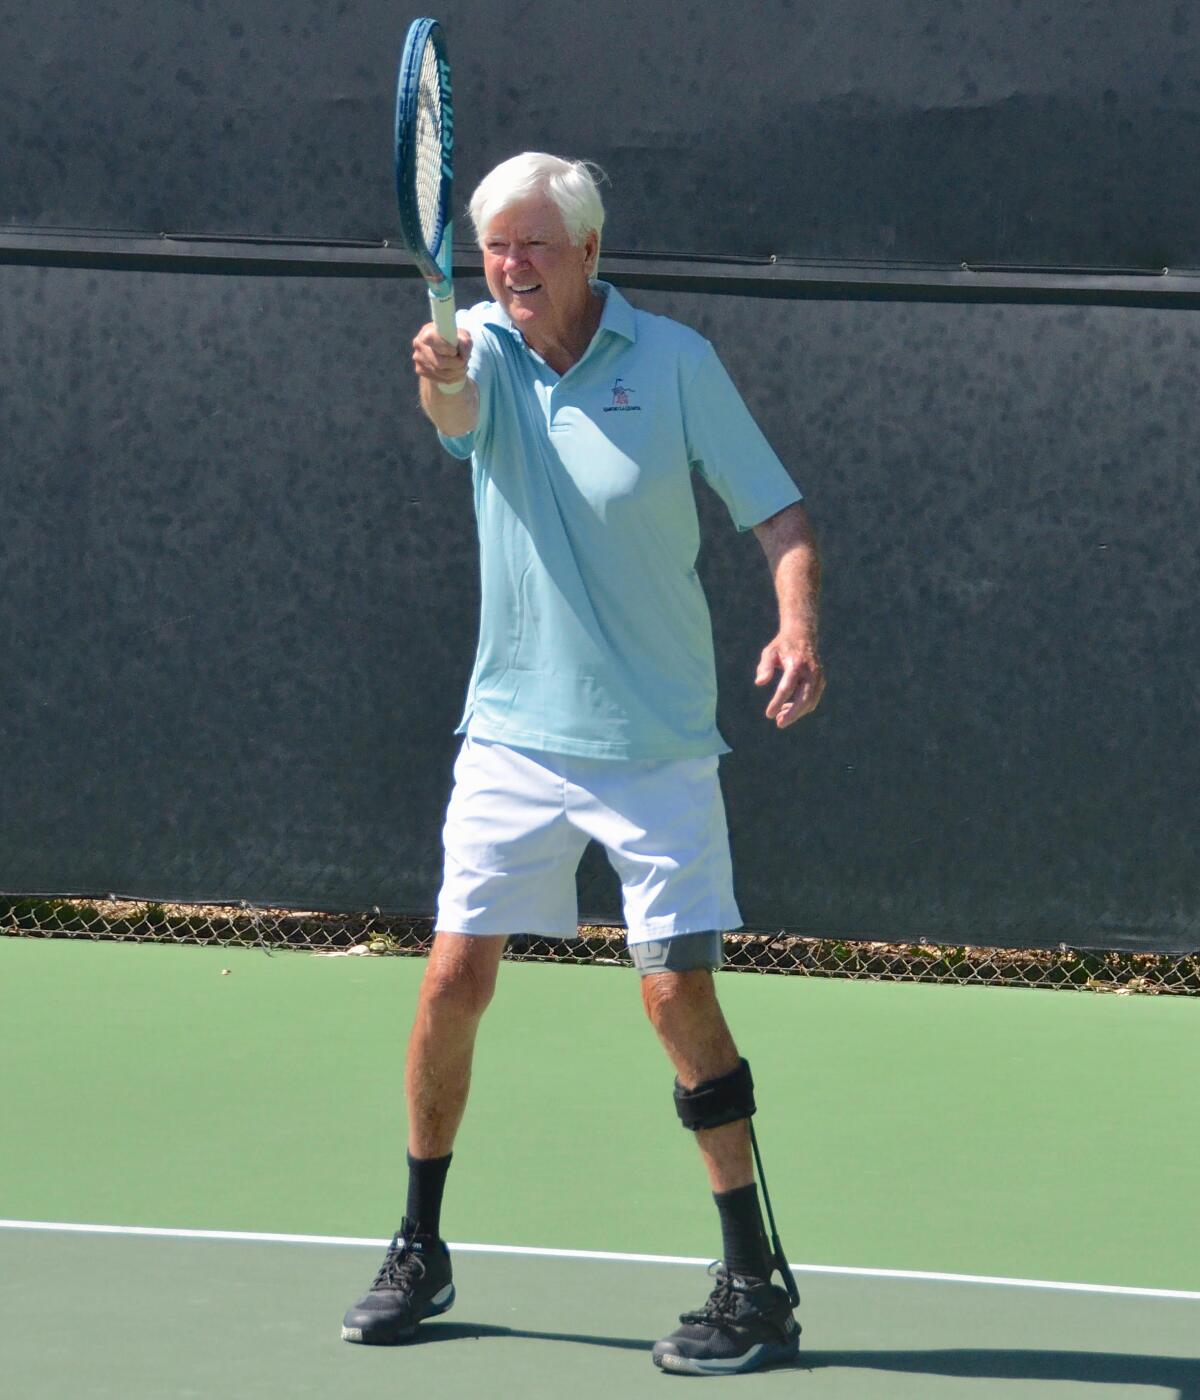 Larry Collins hits a forehand as he plays tennis at the Palisades Tennis Club in Newport Beach on Monday.